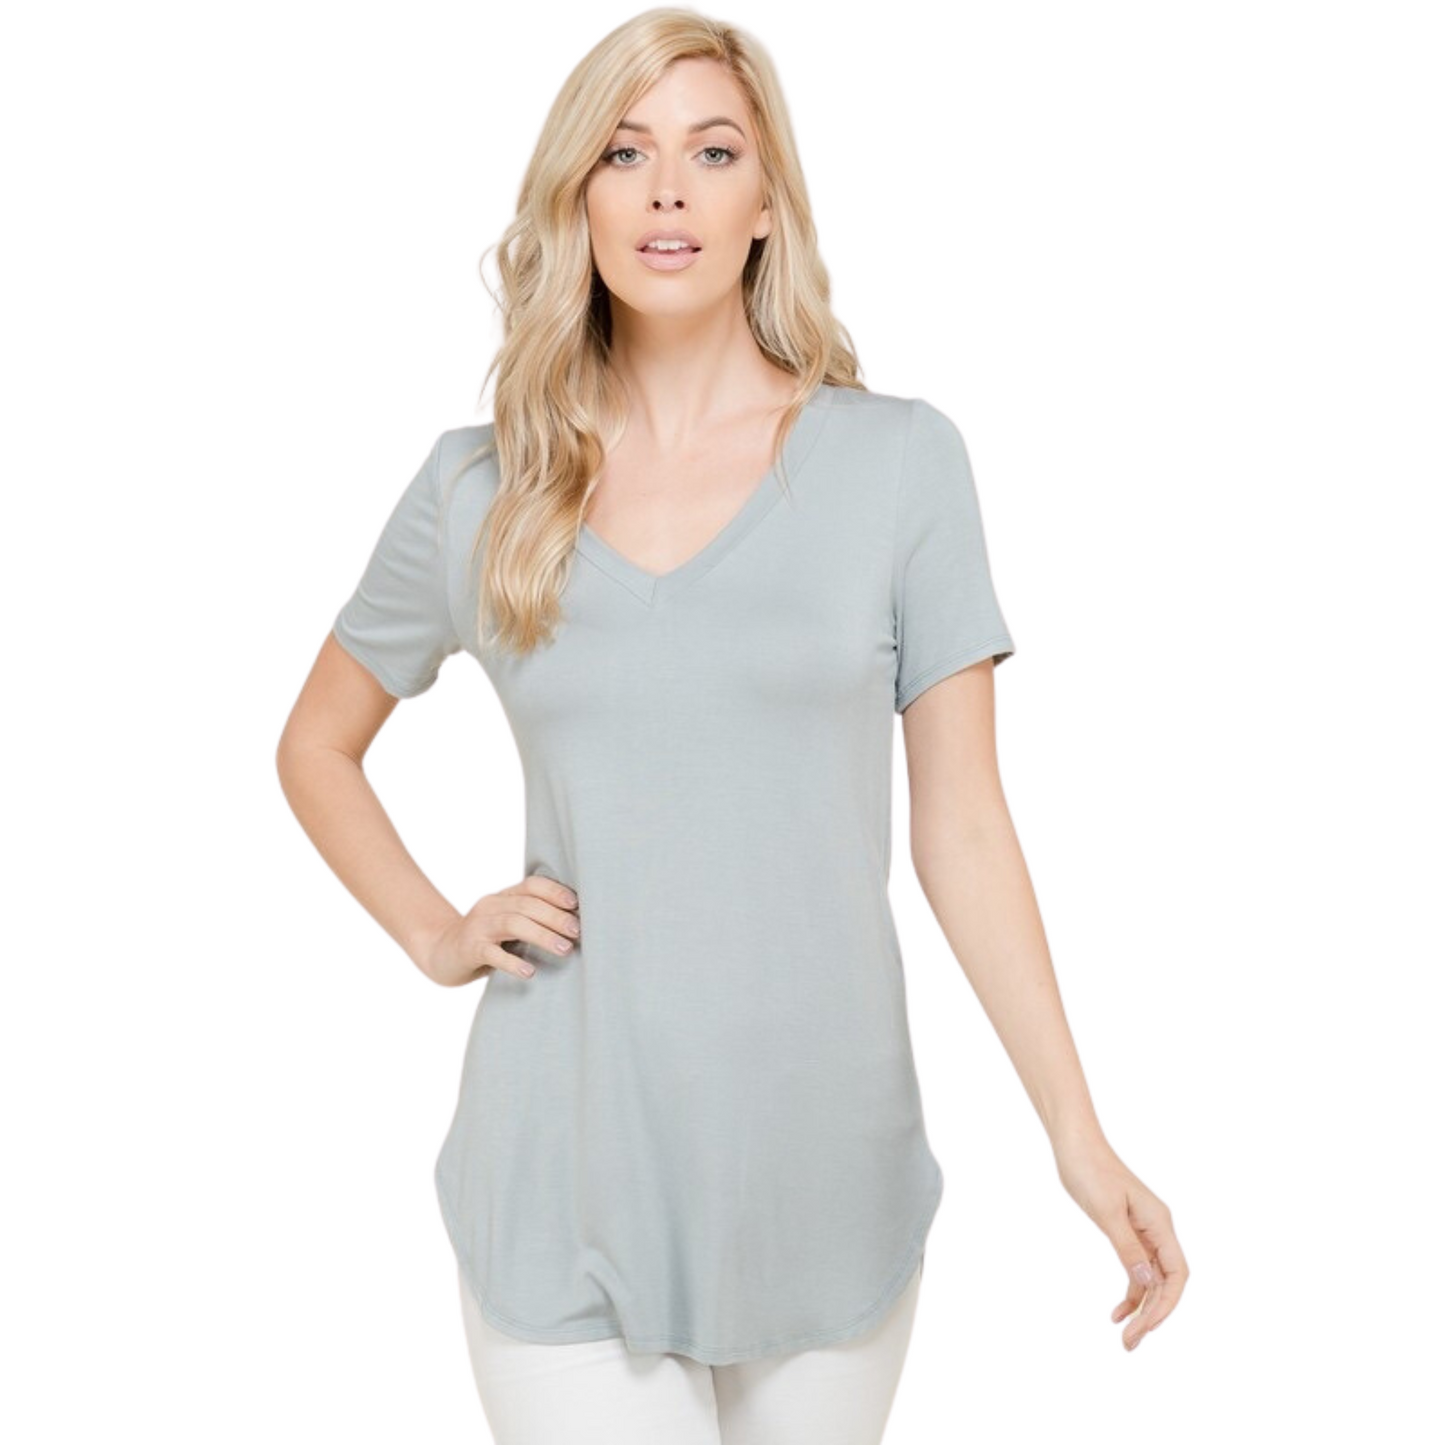 This Fitted V-Neck Tee is designed with plus size women in mind. With a variety of colors available, there is something for everyone. The flattering cut ensures a smooth silhouette for a flattering look.